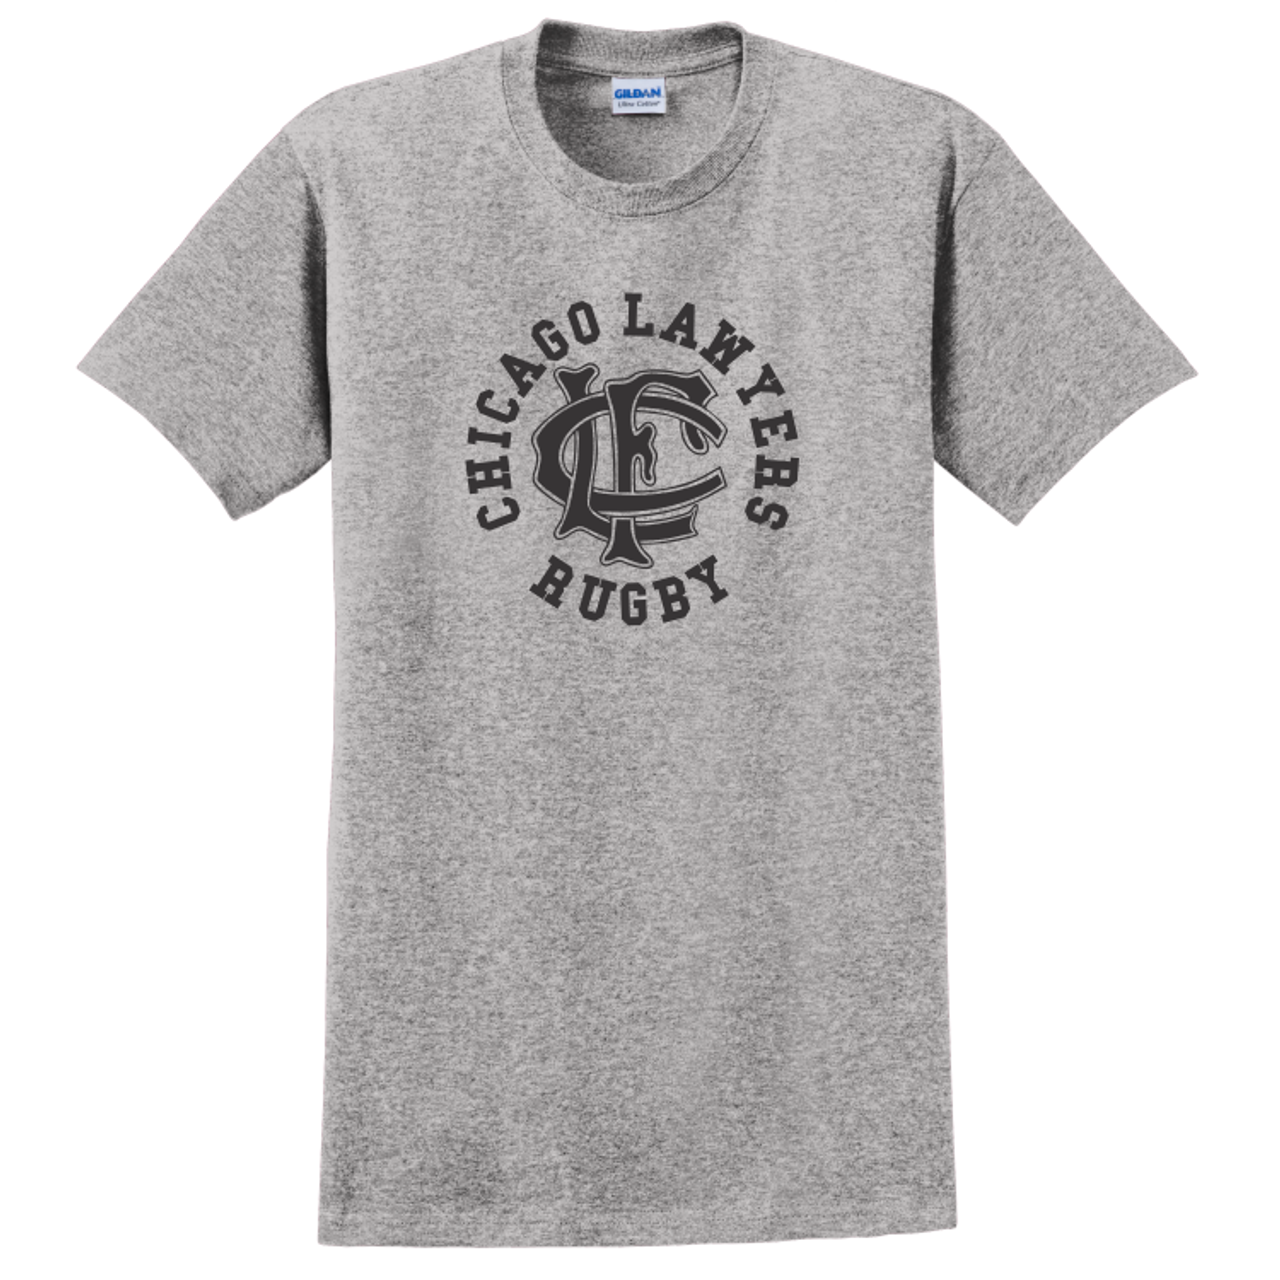 Chicago Lawyers Rugby Tee, Gray